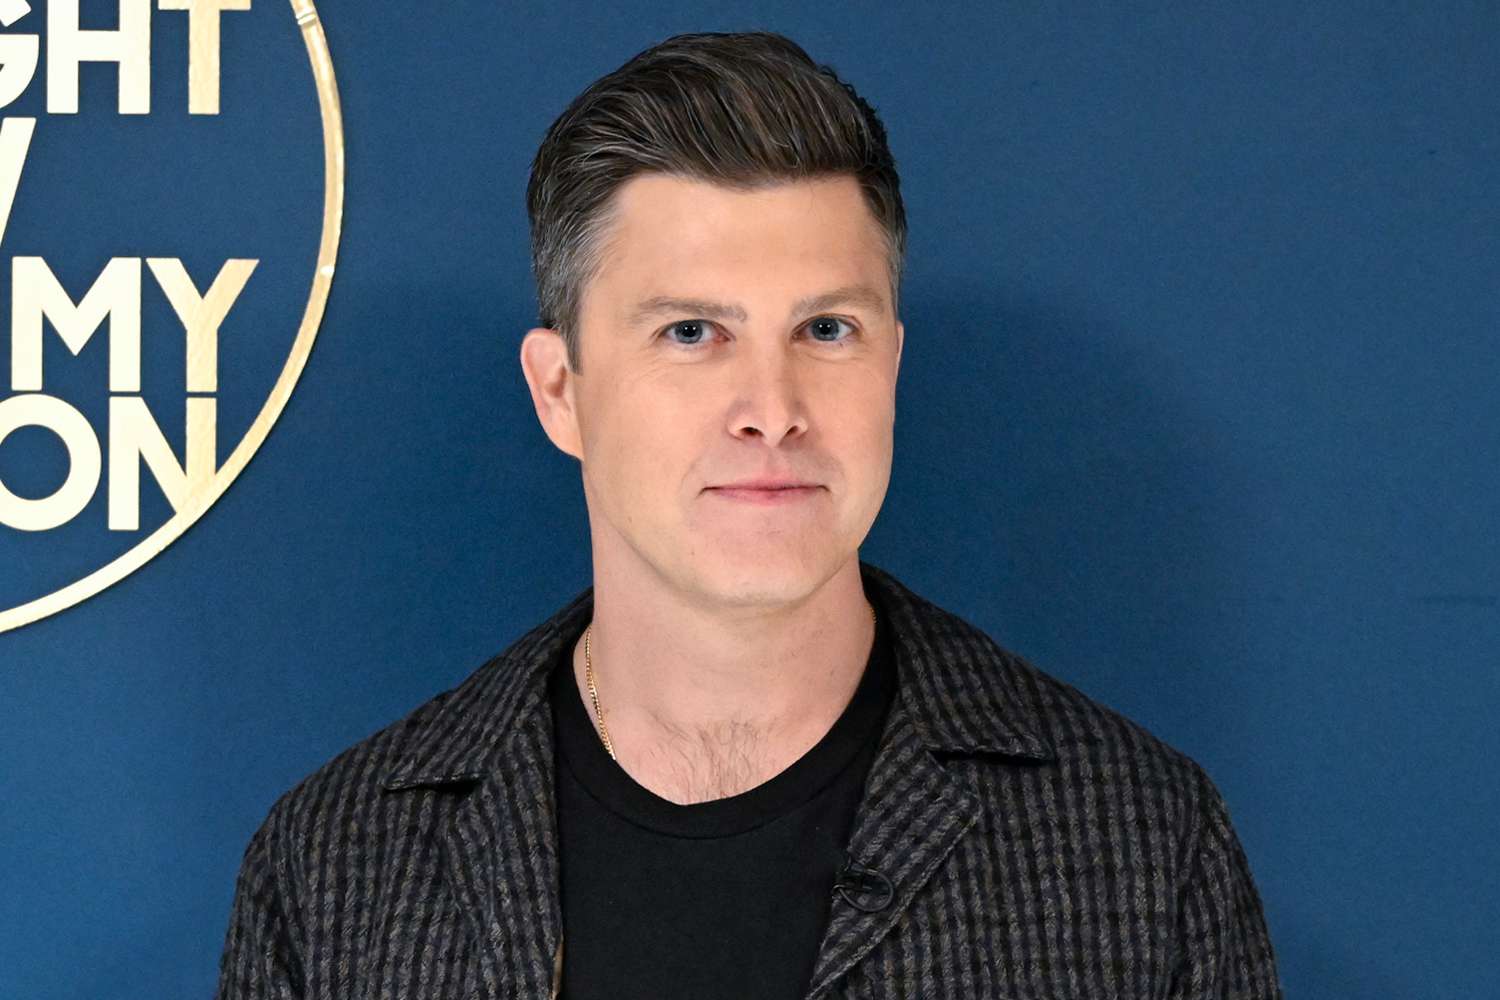 Colin Jost has Greg Berlanti to thank for his 'Fly Me to the Moon' cameo, not wife Scarlett Johansson